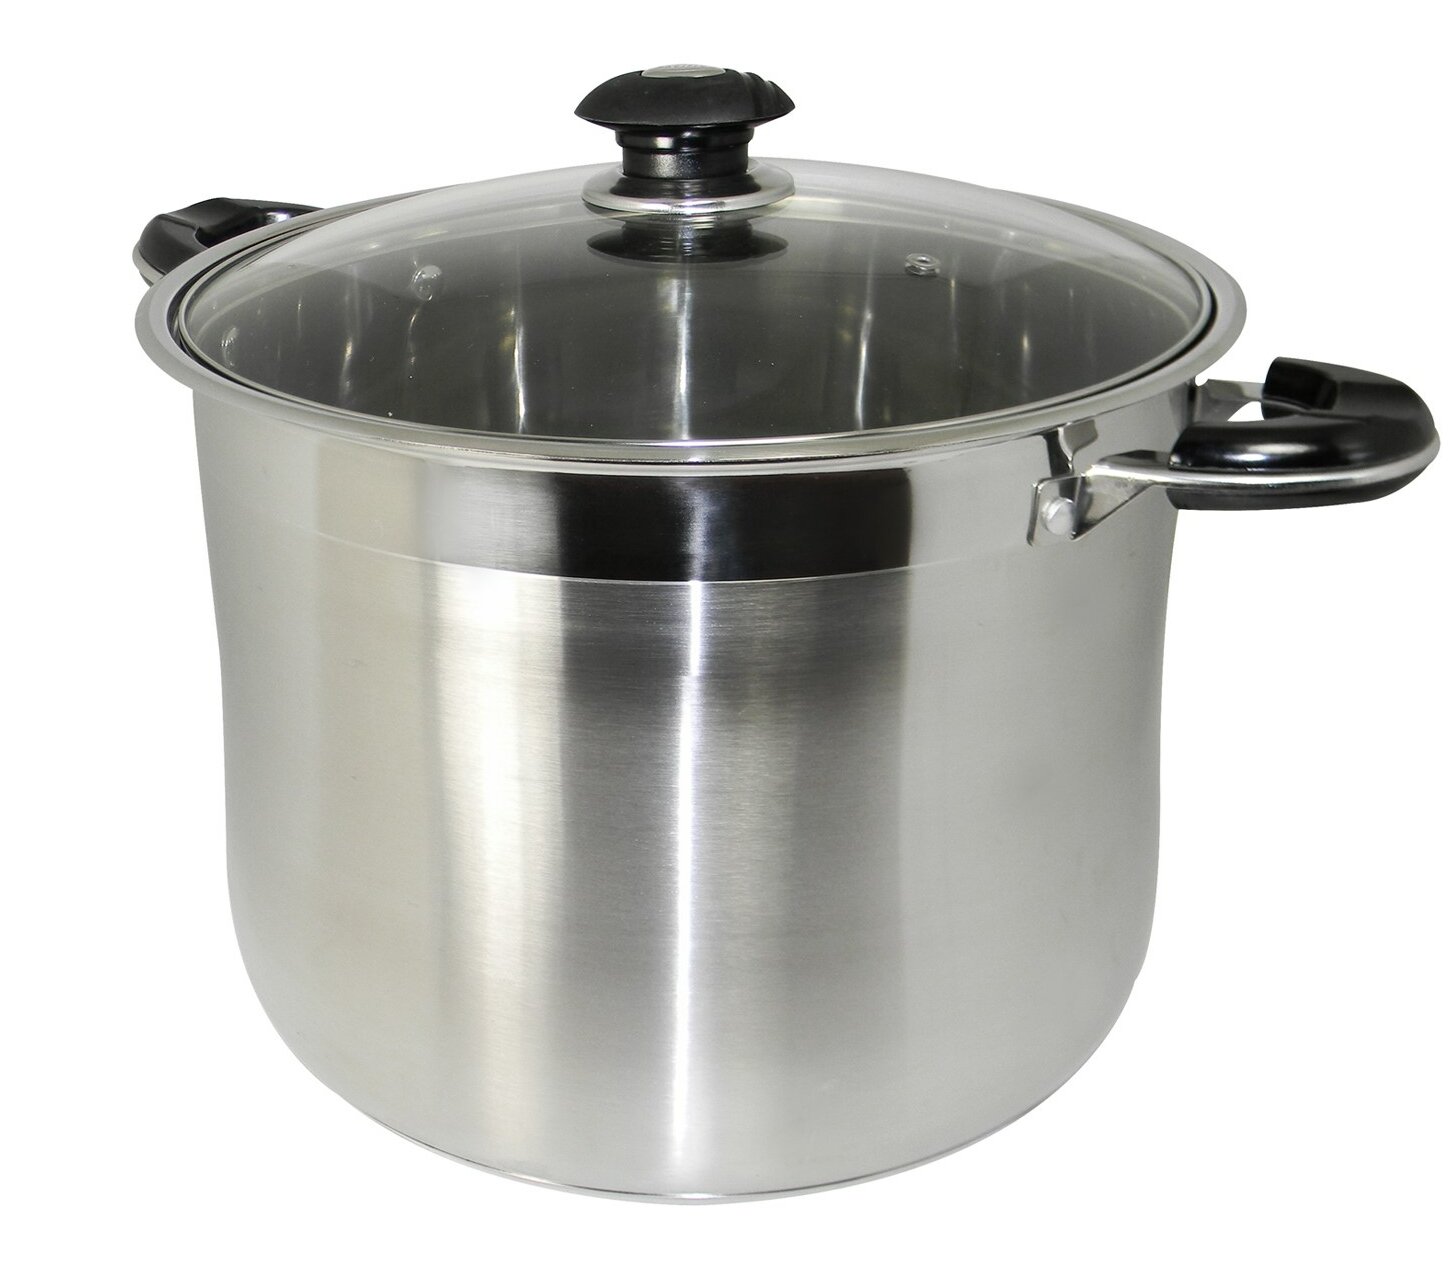 Prime Pacific 24 Quarts Stainless Steel & Reviews